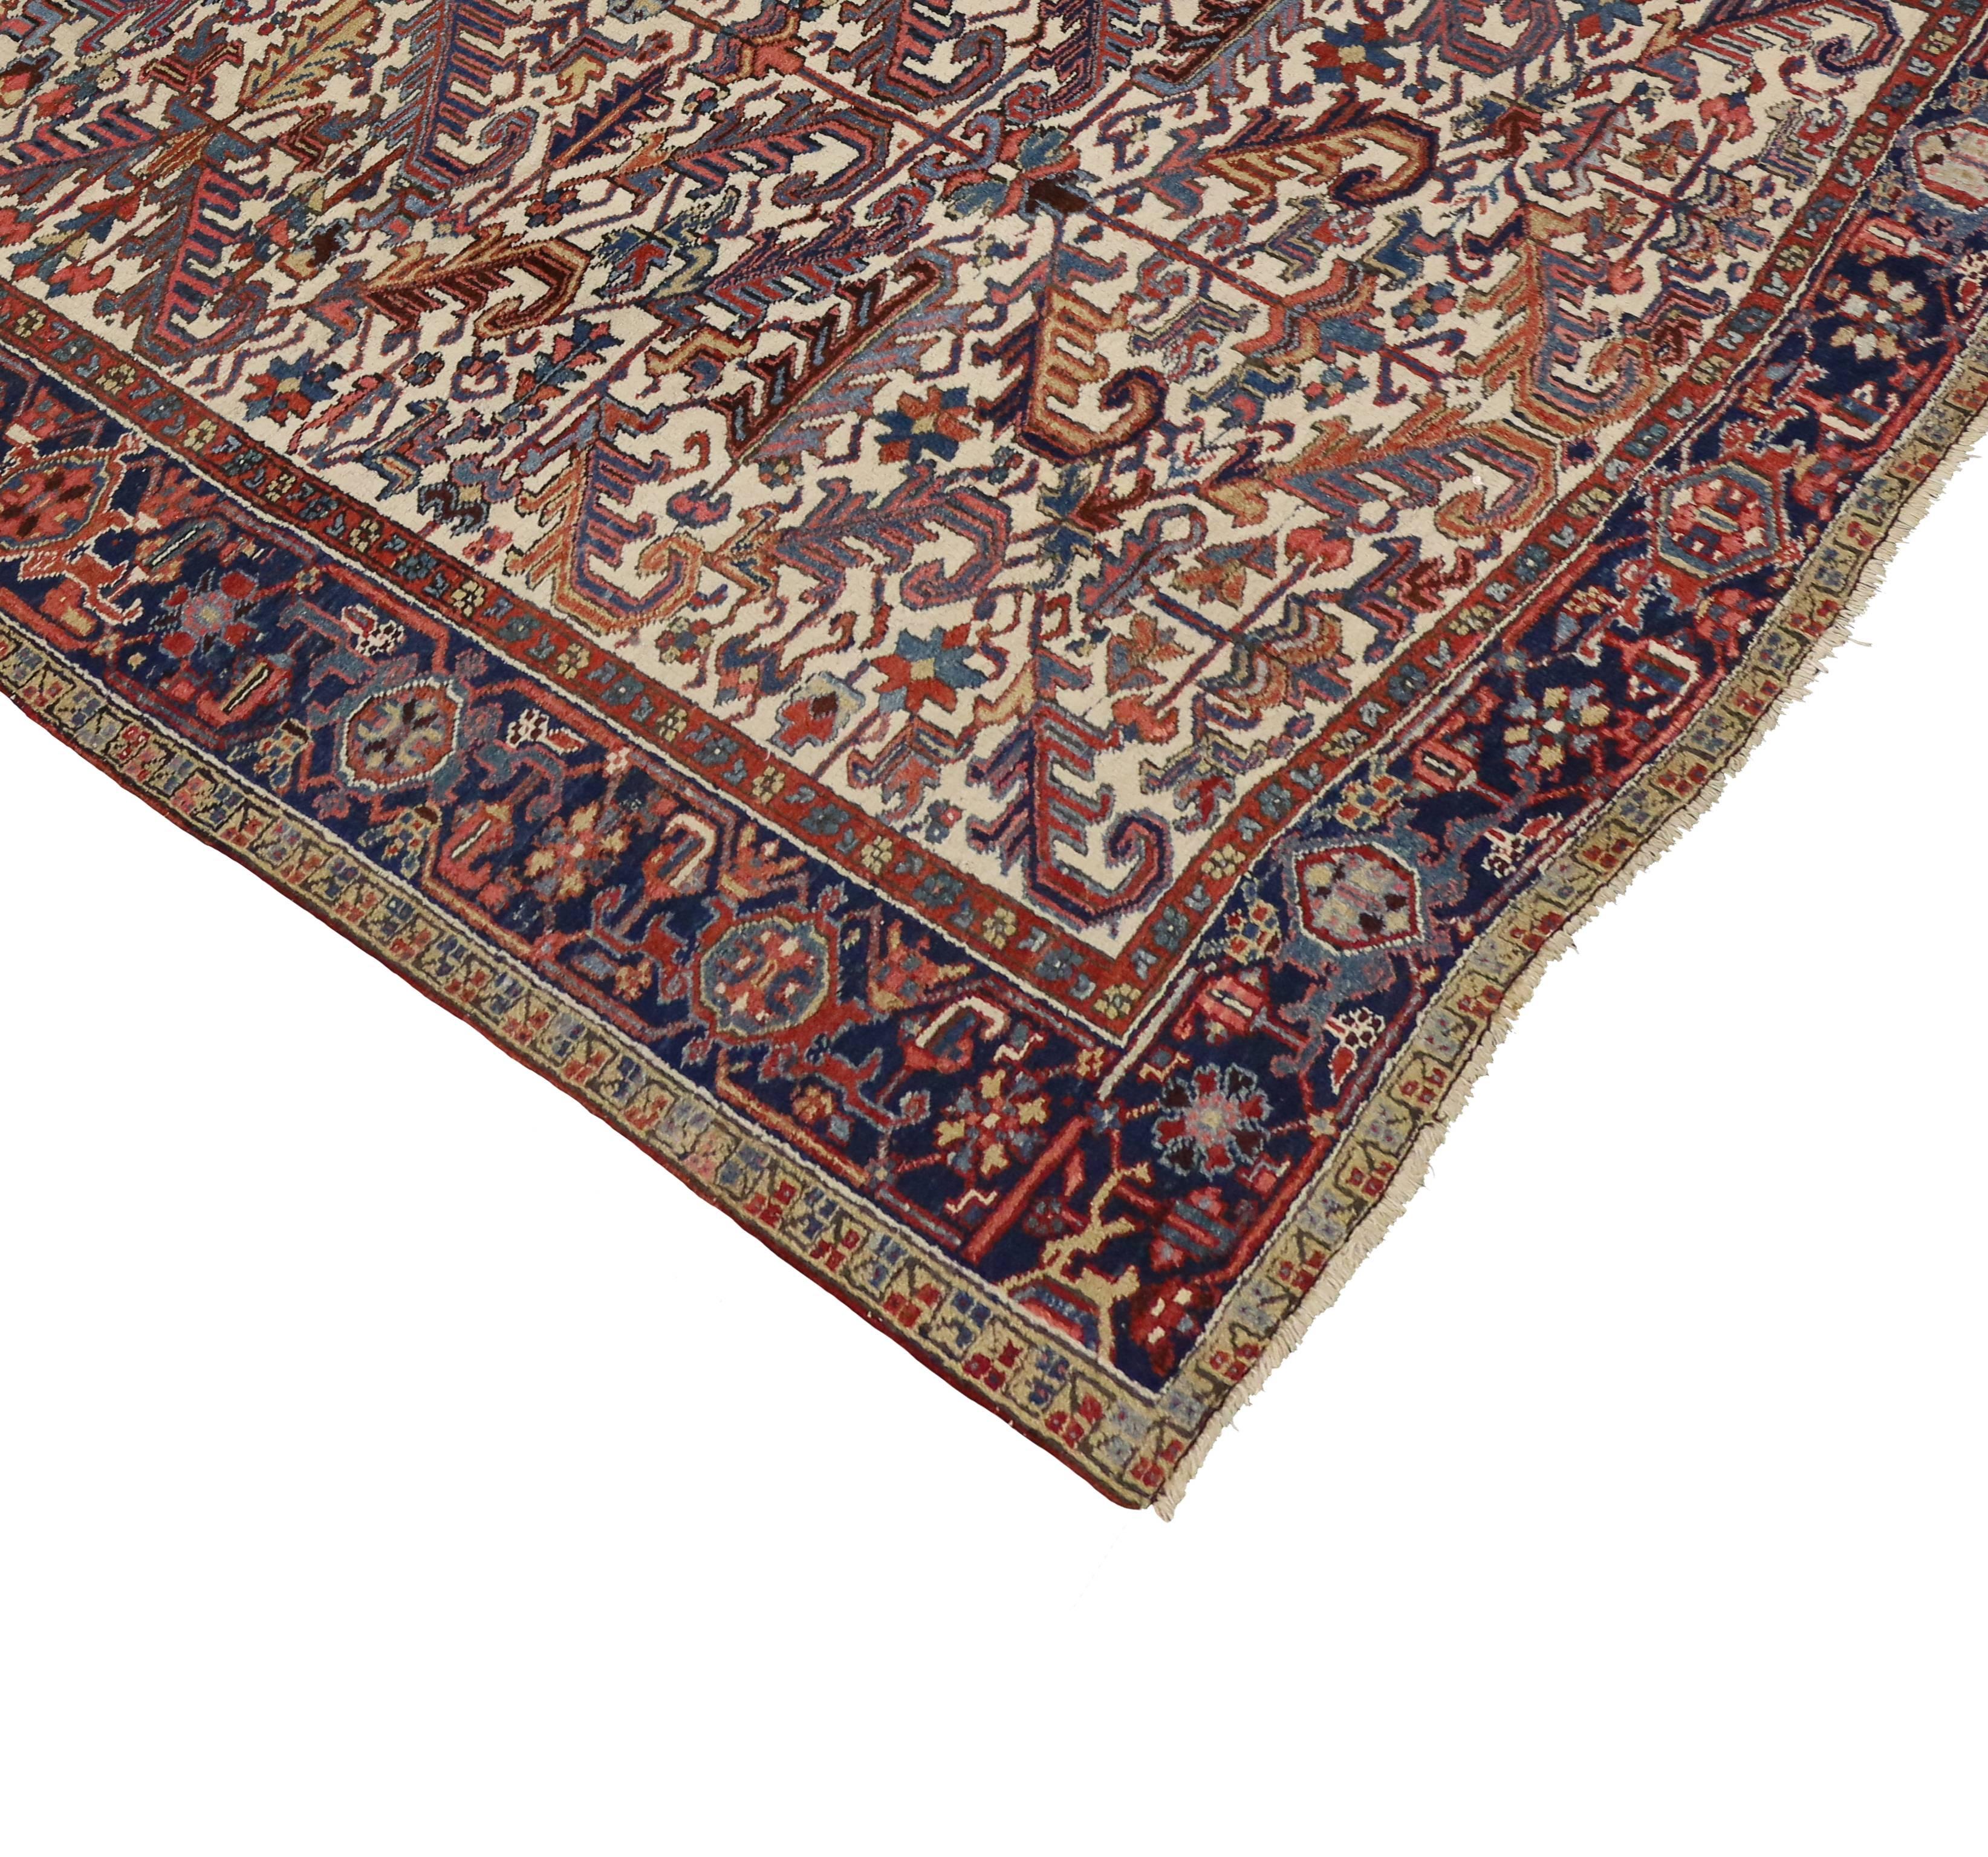 73342 Antique Persian Heriz Rug with Modern Tribal Style. With an artful balance between delicacy and the geometric design, this antique Persian Heriz rug will infuse your home with incomparable warmth and refinement. This antique Persian Heriz rug